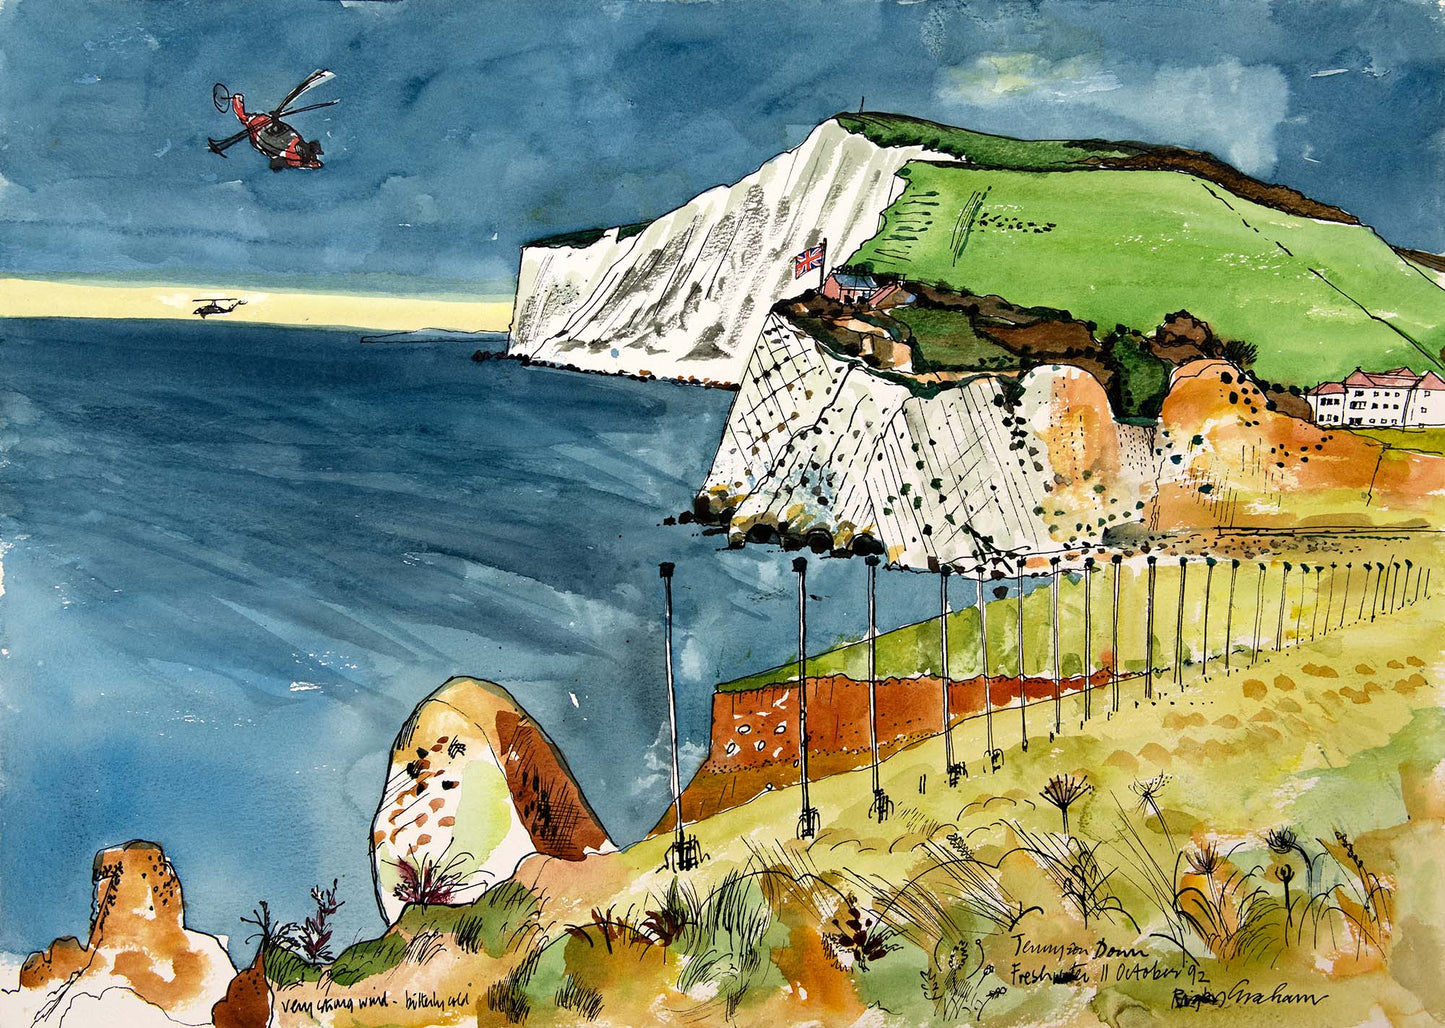 Tennyson Down, Freshwater Bay with Helicopter